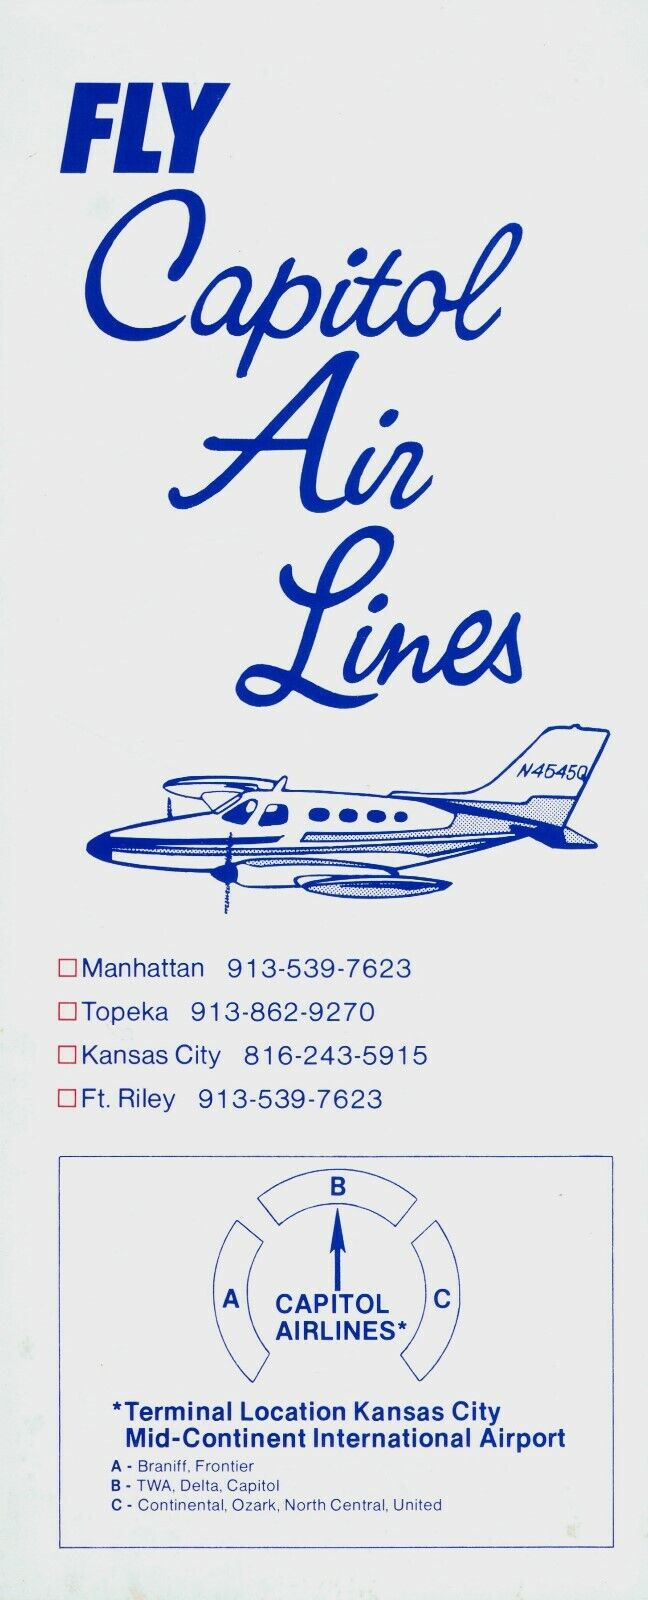 Capitol Air Lines Timetable  January 1, 1977 =